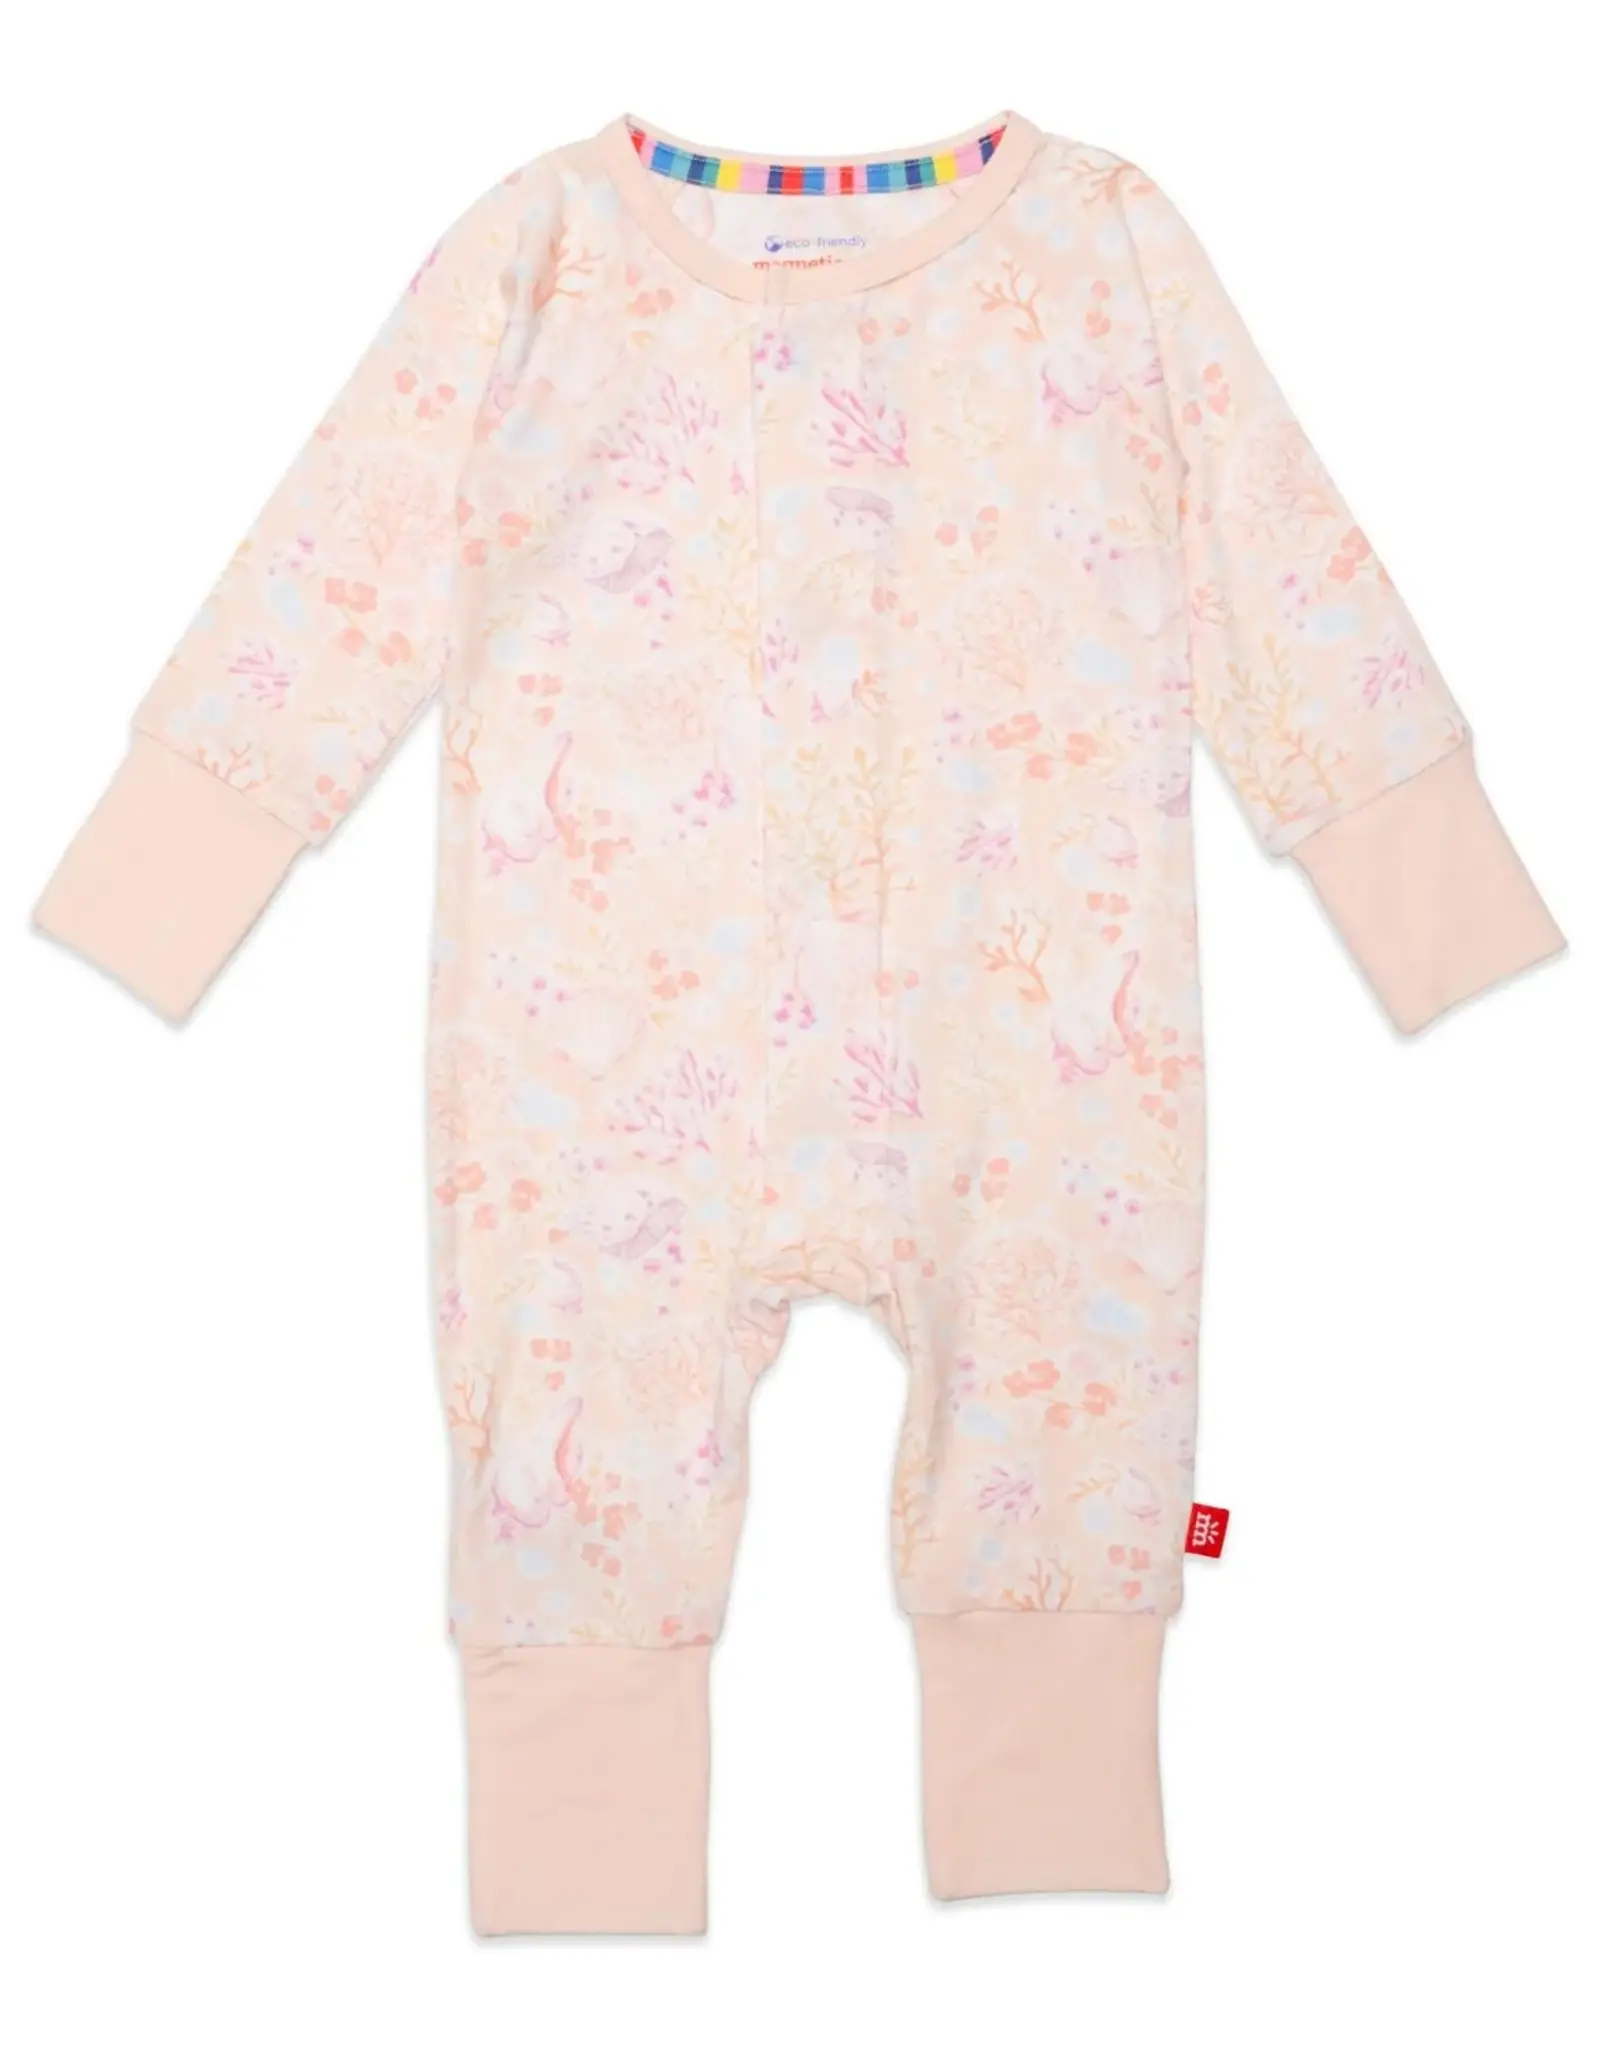 Magnetic Me 6-9MO: Coral Floral Grow With Me Coverall